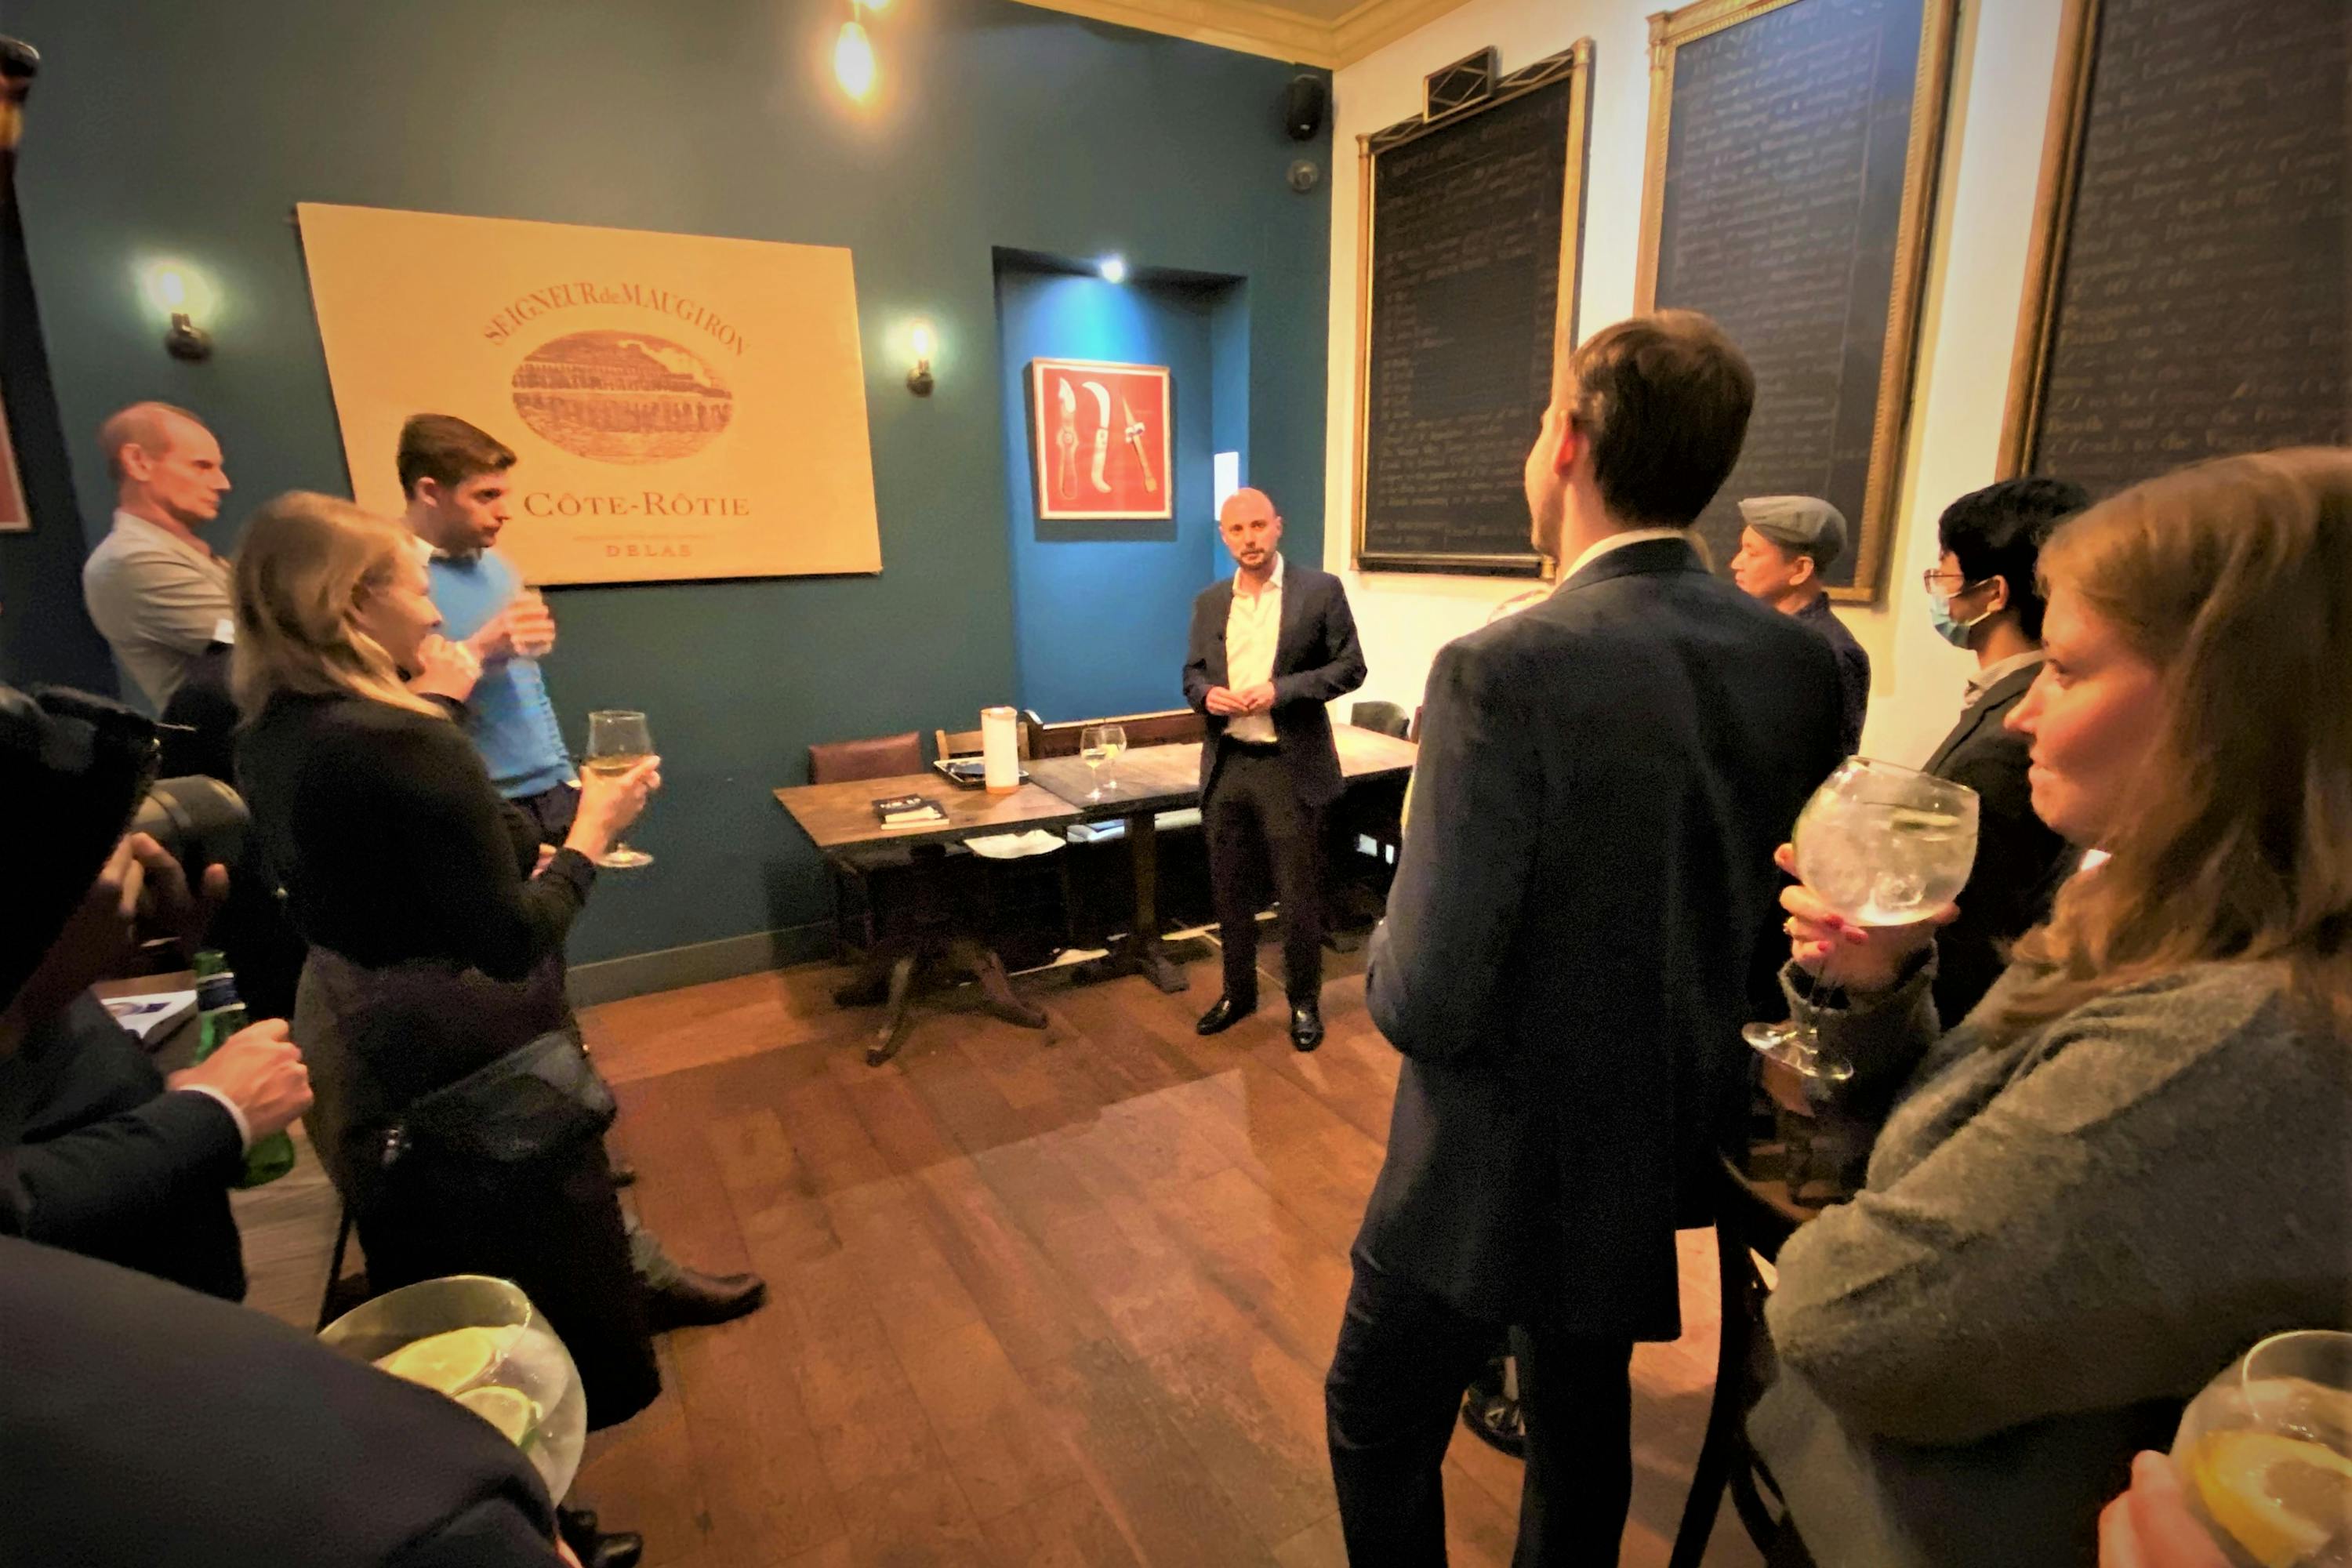 The Watch Collectors' Club CEO Hamish Robertson giving a short talk on How to Appraise a Watch at the October 2021 In-Person Meetup